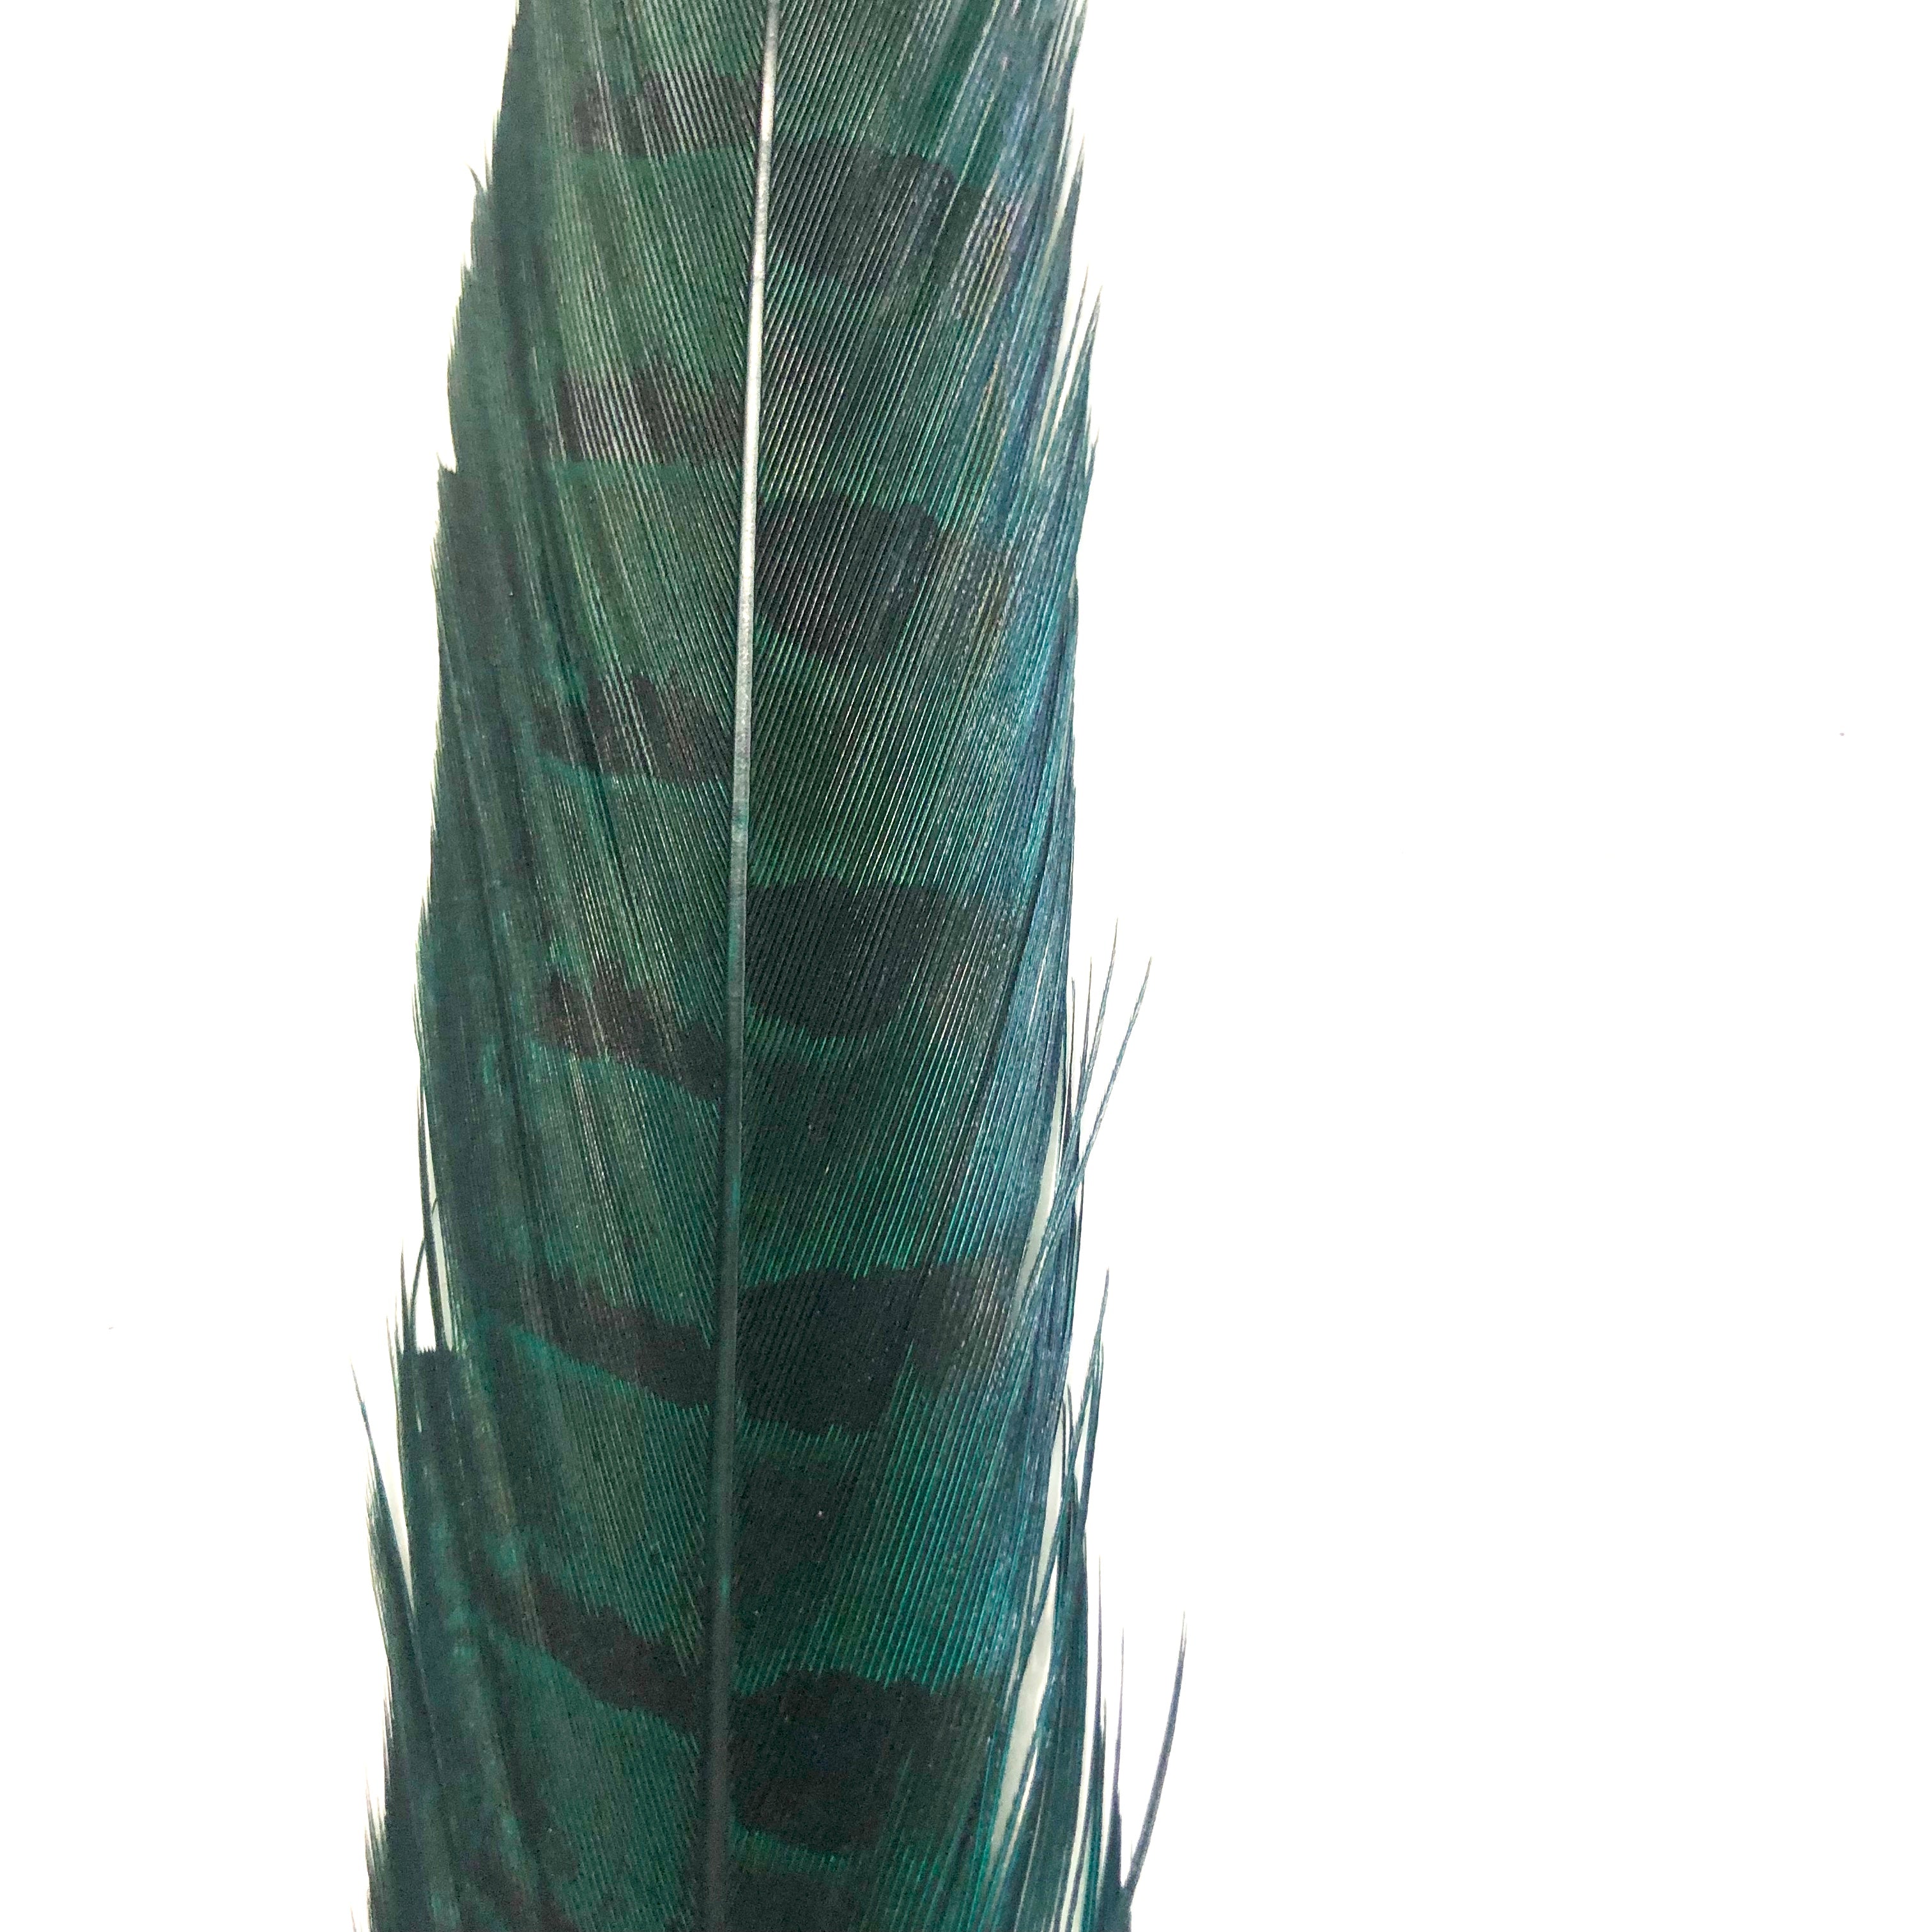 10" to 20" Ringneck Pheasant Tail Feather - Emerald Green